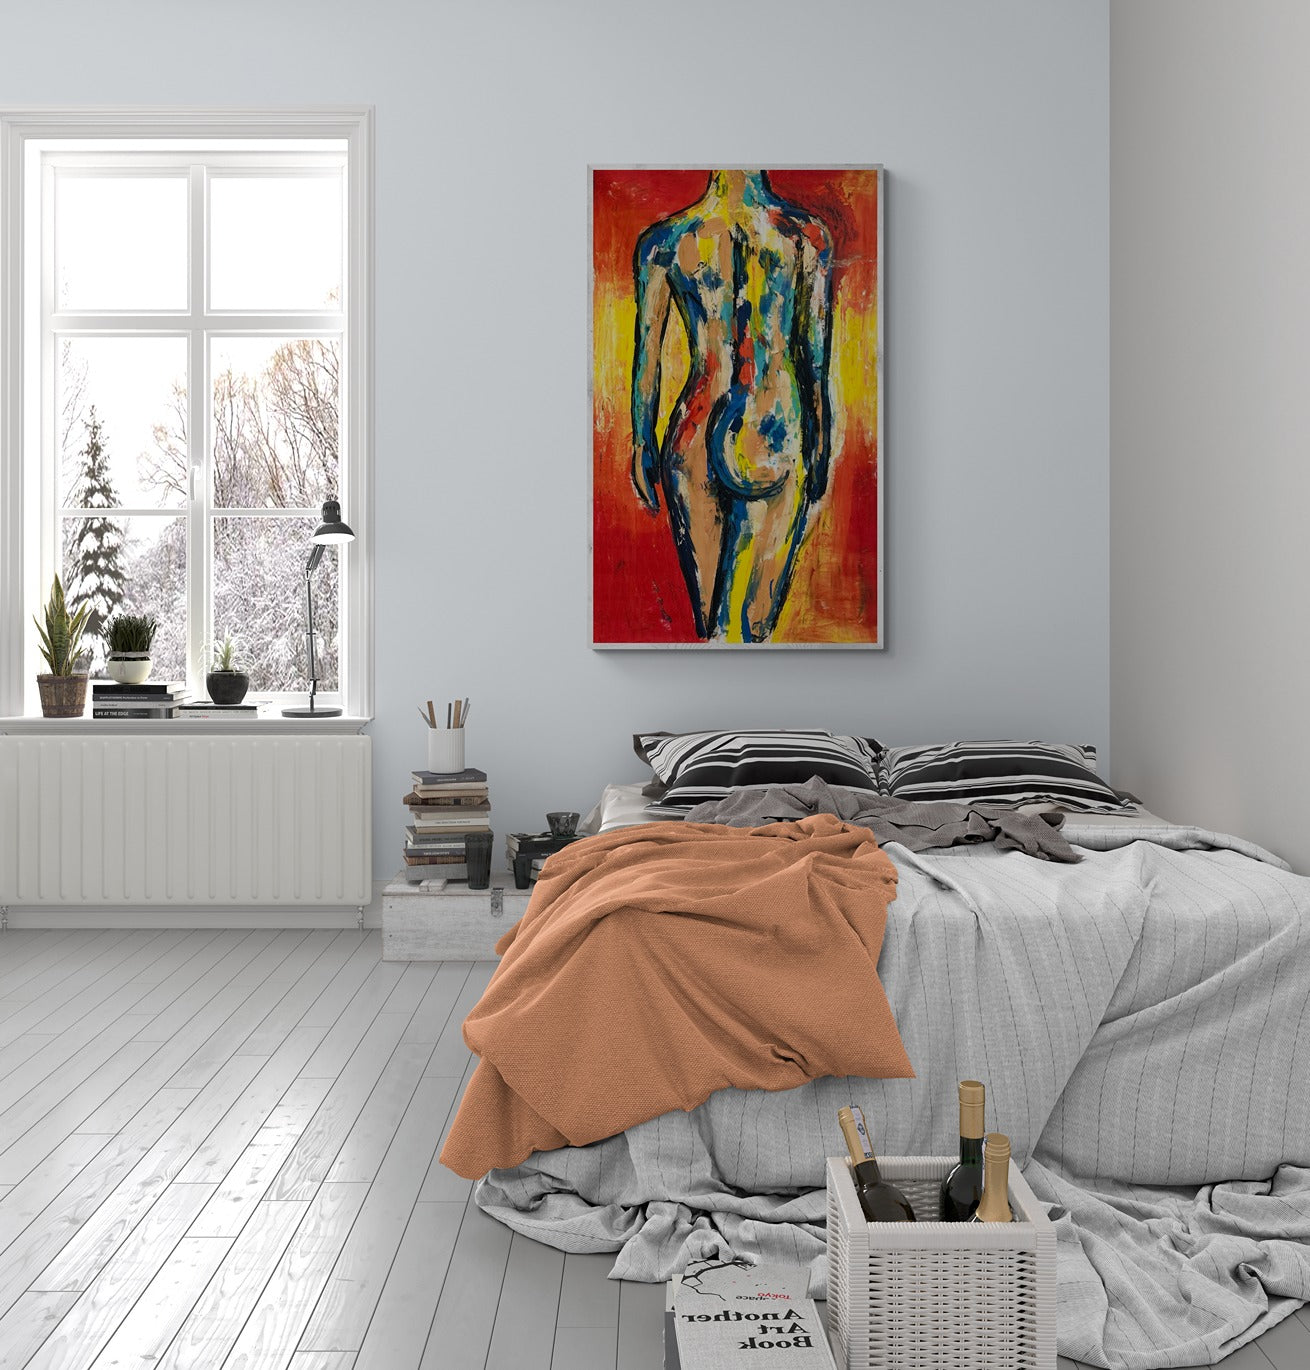 Confy bedroom with frosty outdoor views displaying a large abstract wall art original painting